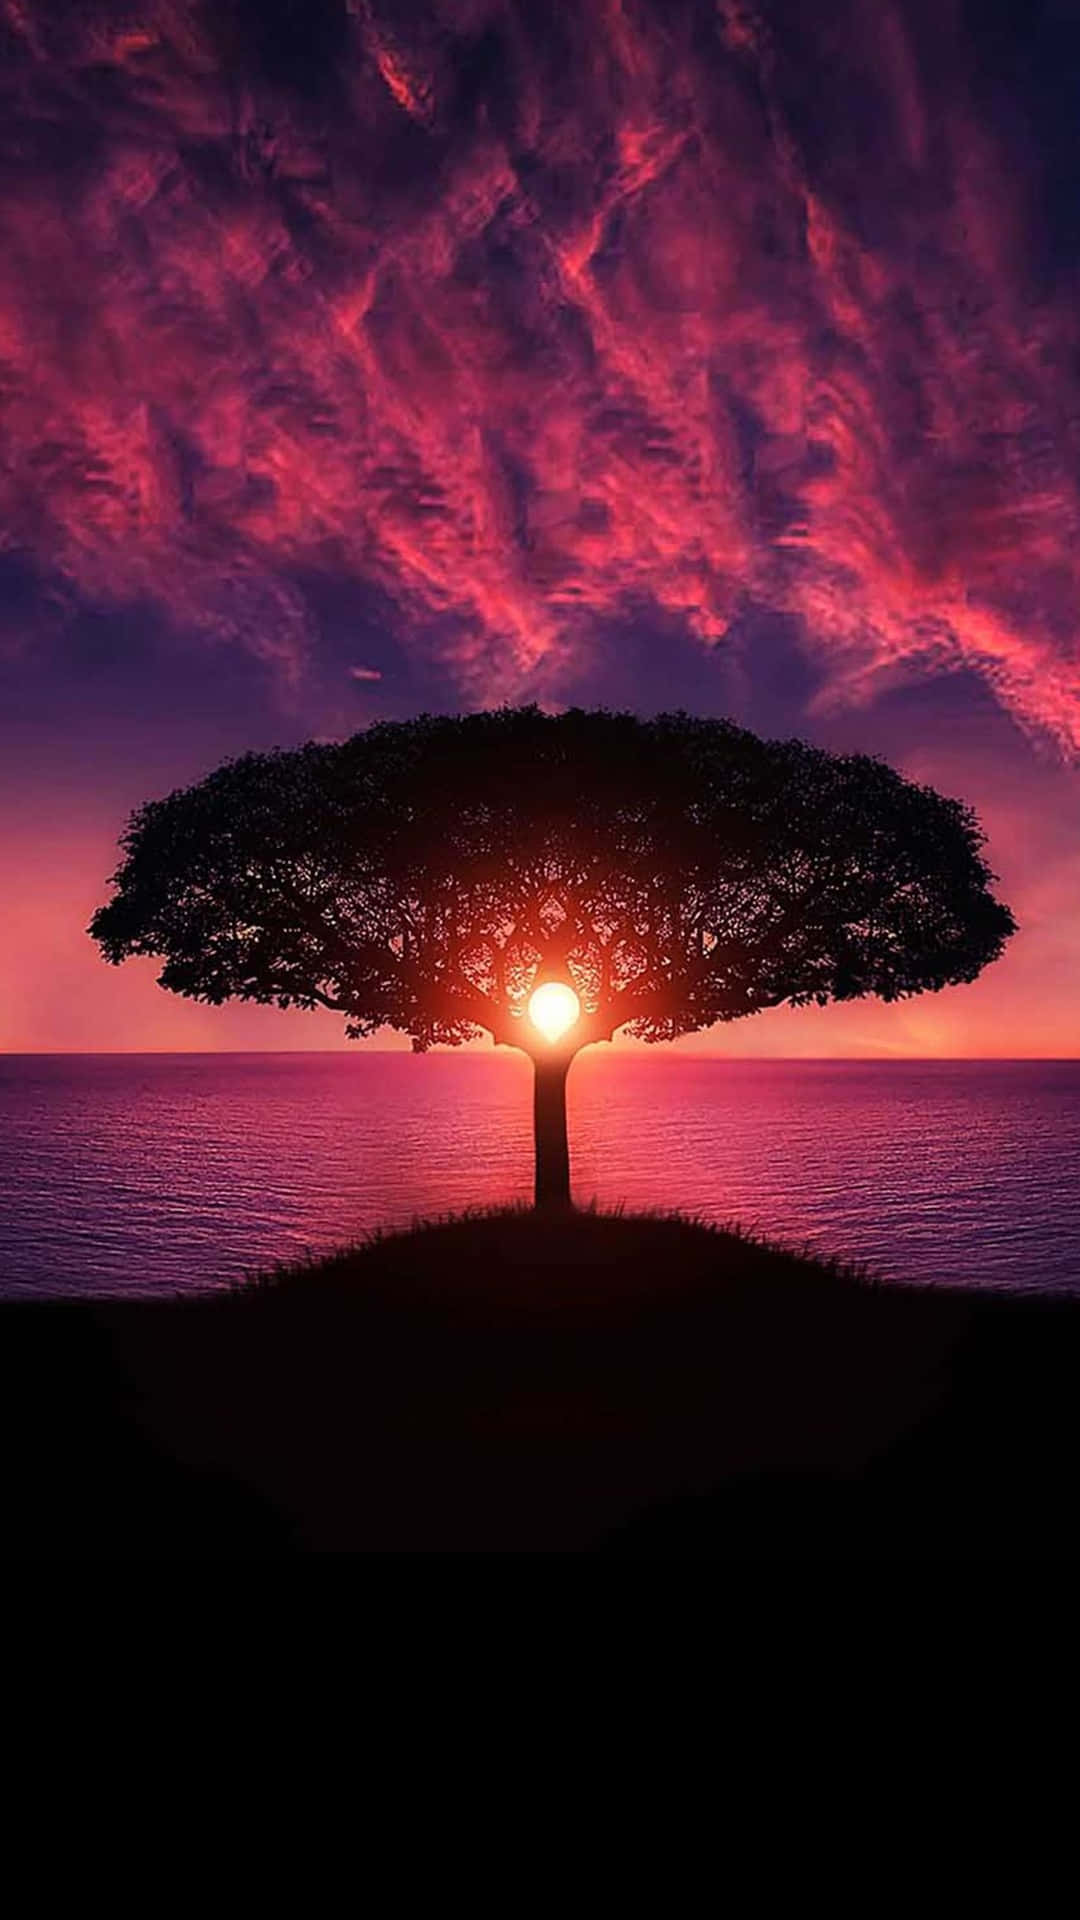 Tree Silhouette In Sunset Sky Colorful 4k Phone